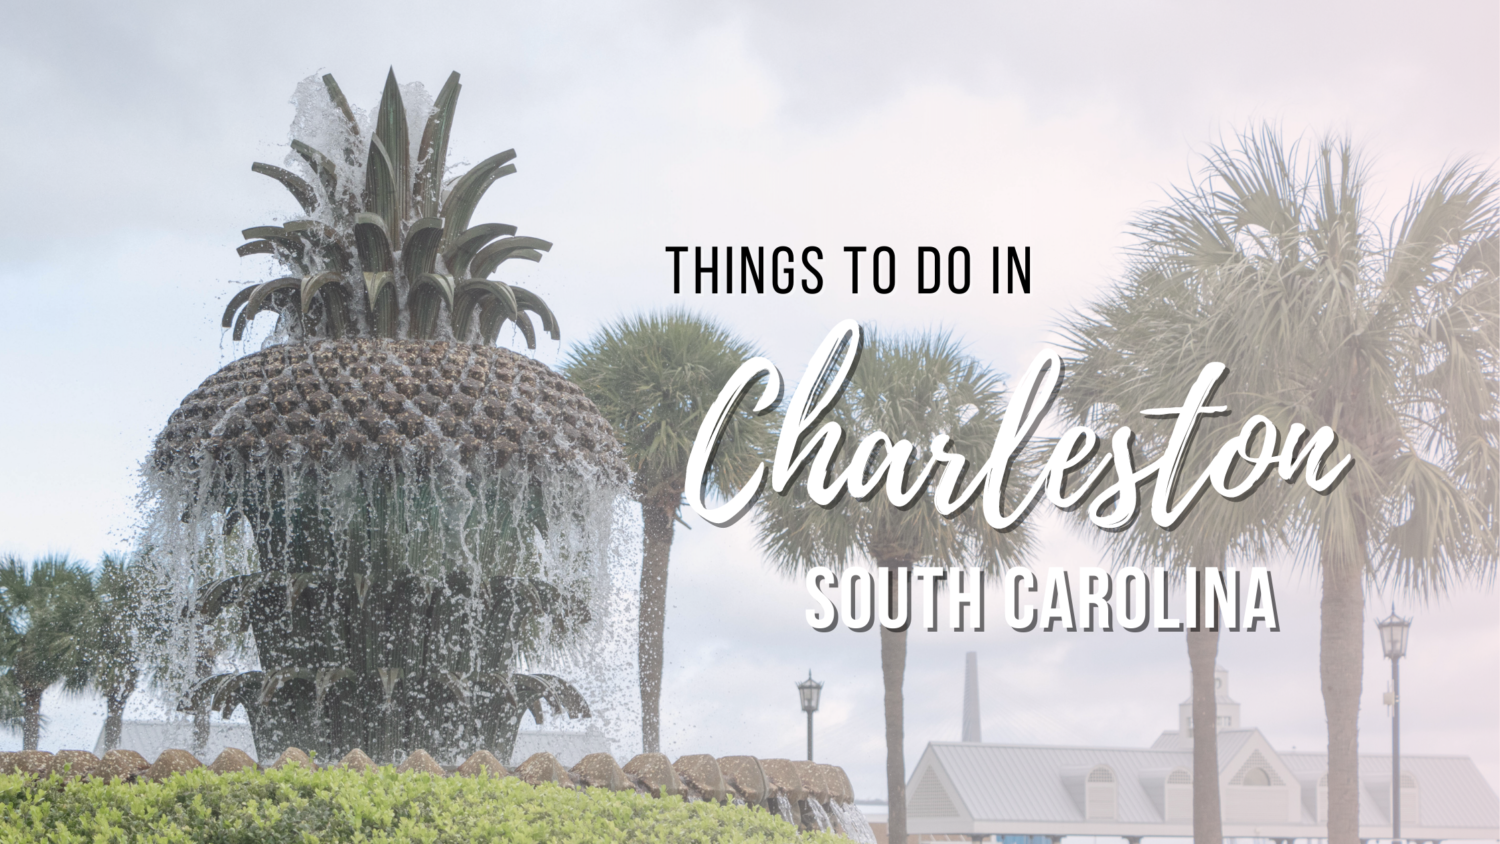 Best Things to Do in Charleston, South Carolina